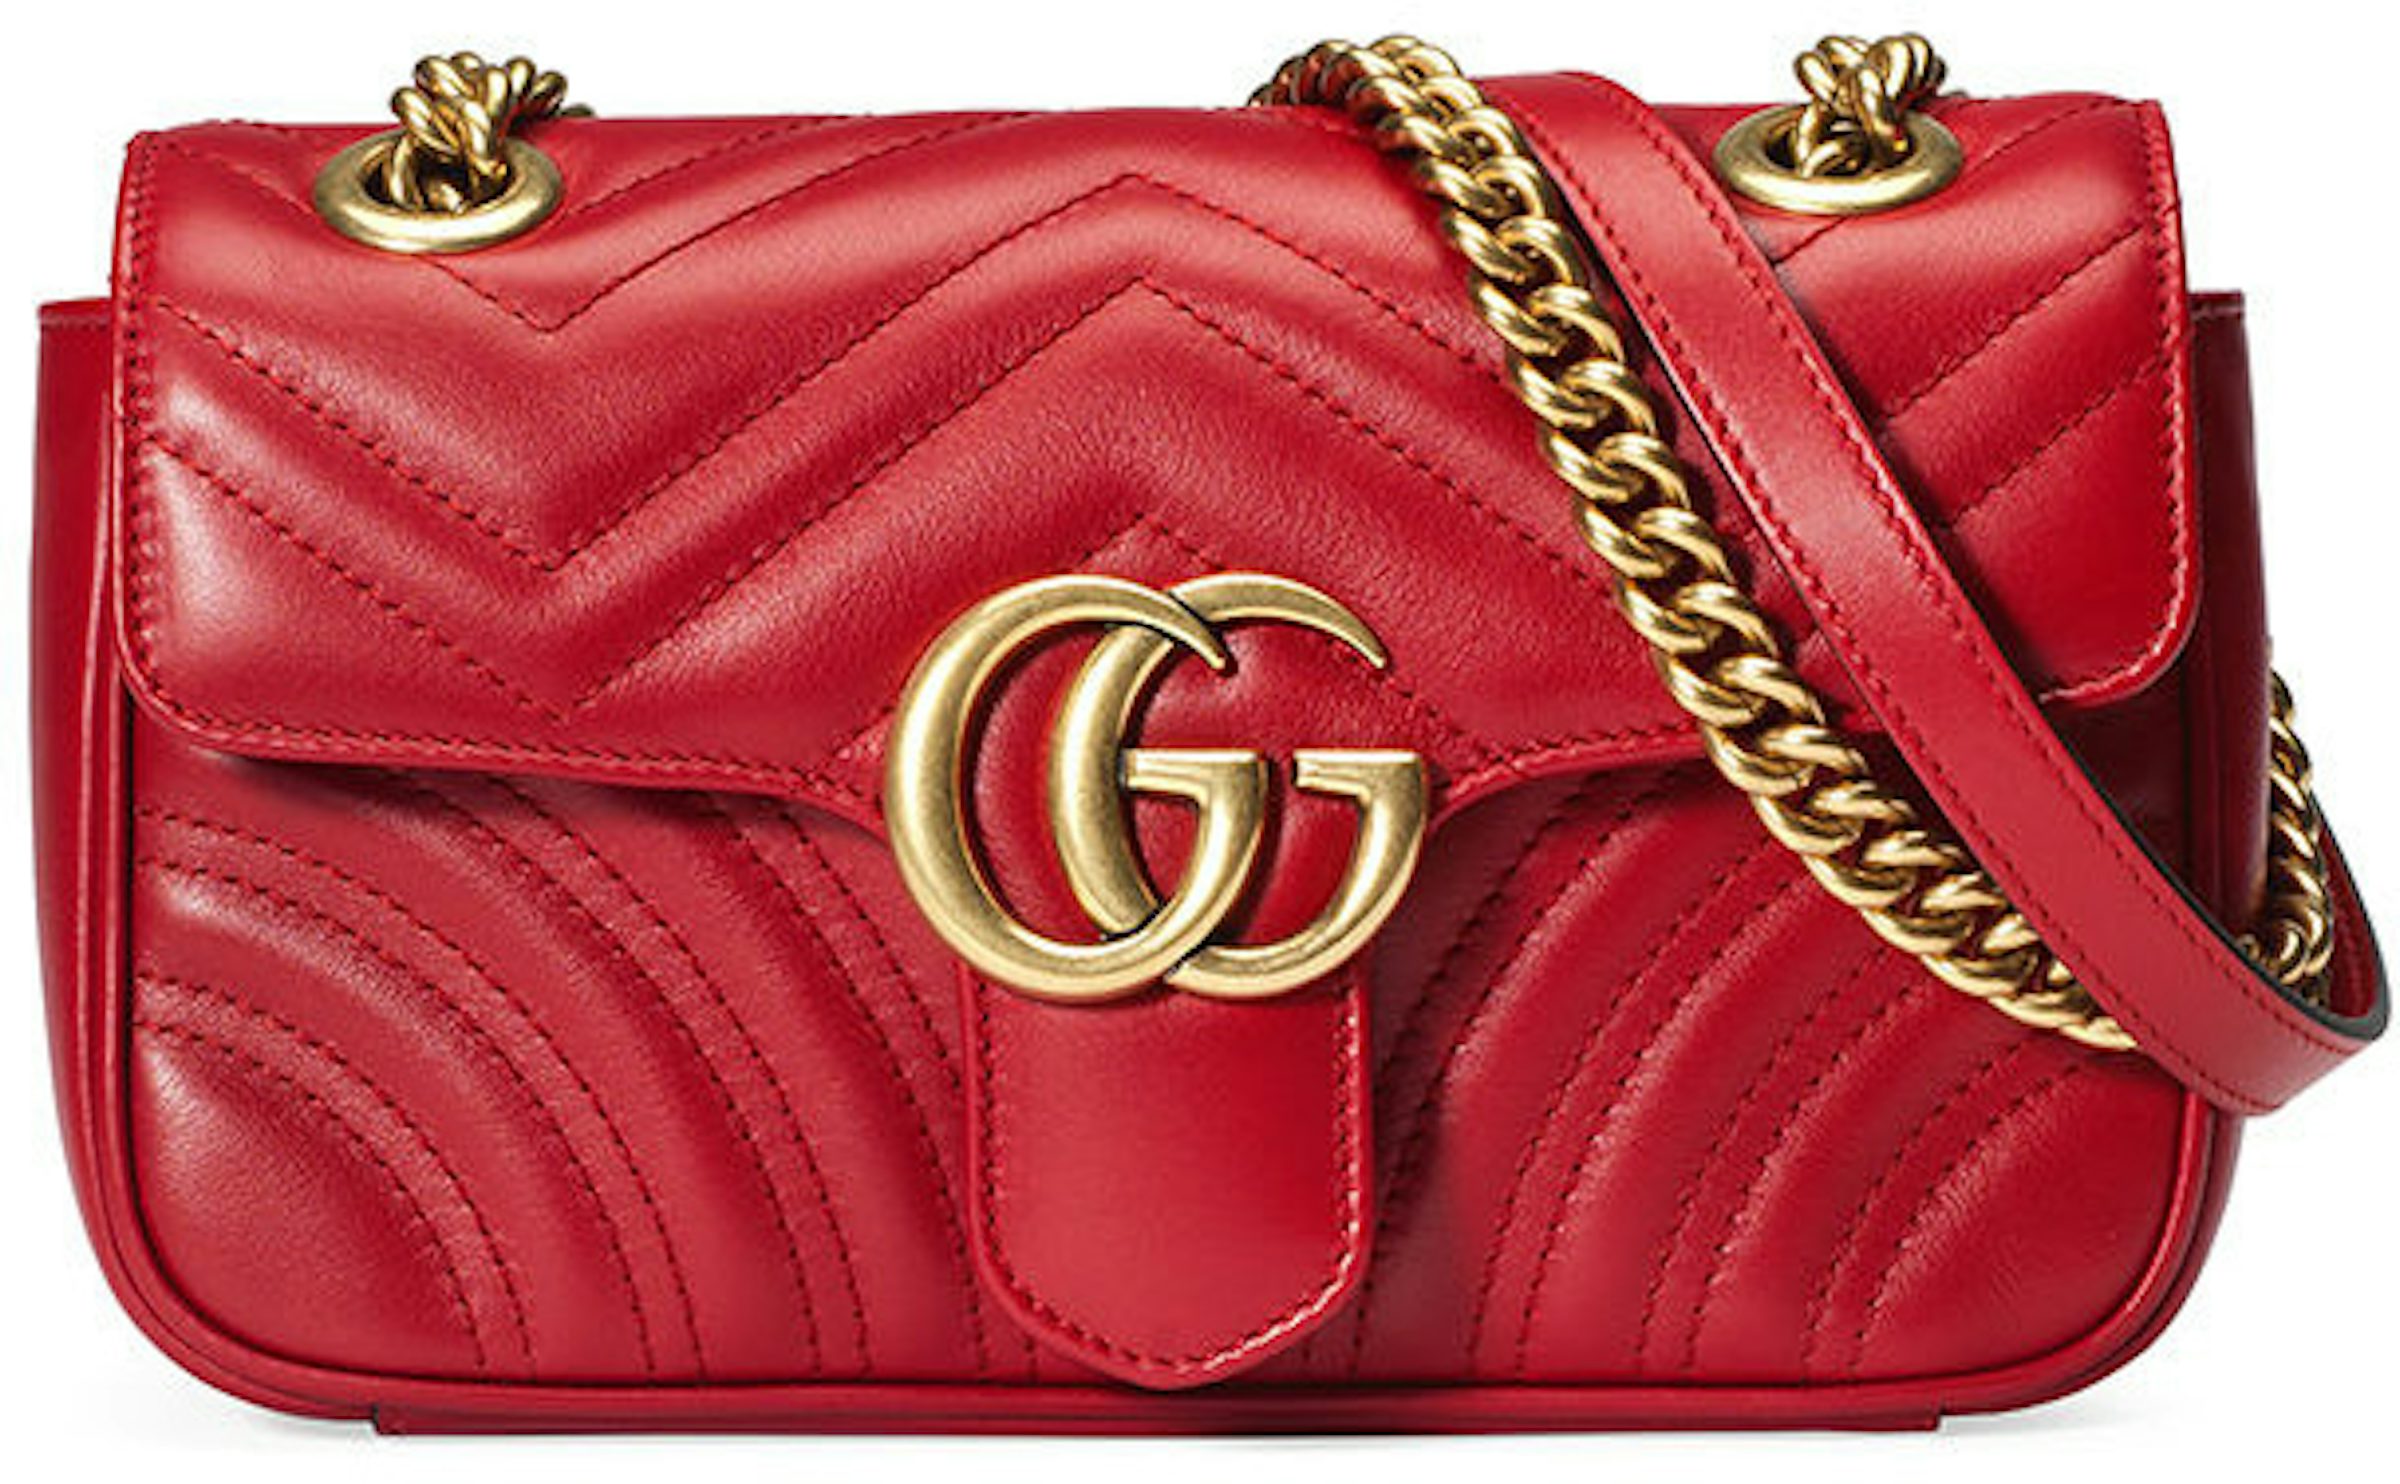 GG Marmont matelassé mini bag in red leather